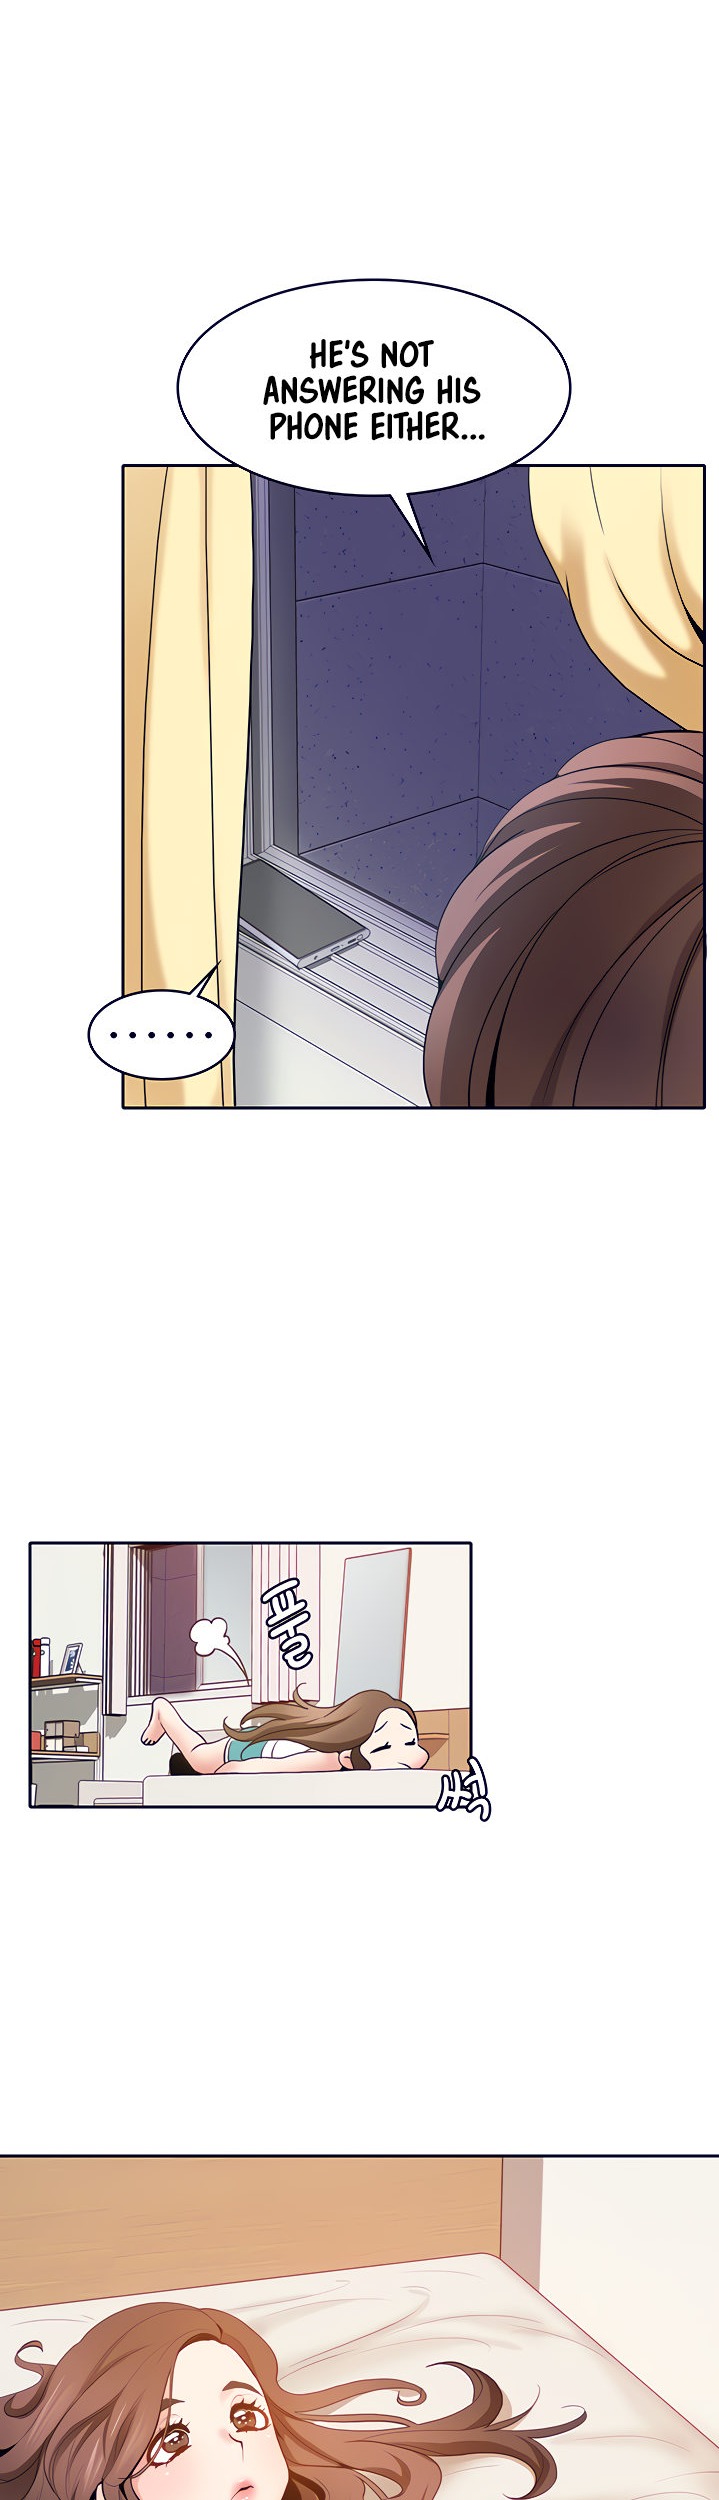 Need A Service? - Chapter 2 Page 32